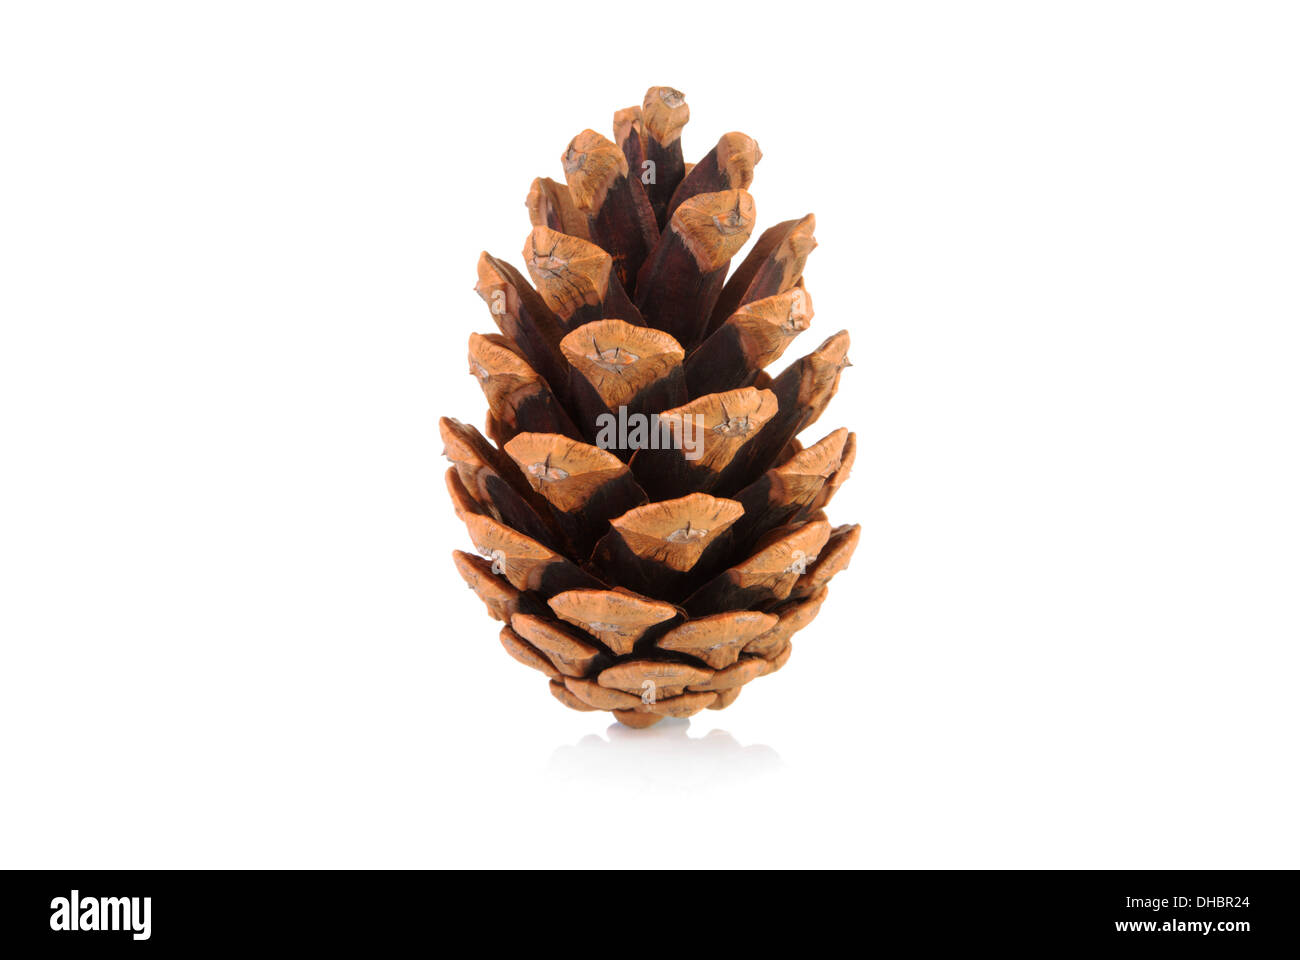 Pine cone on a white background Stock Photo